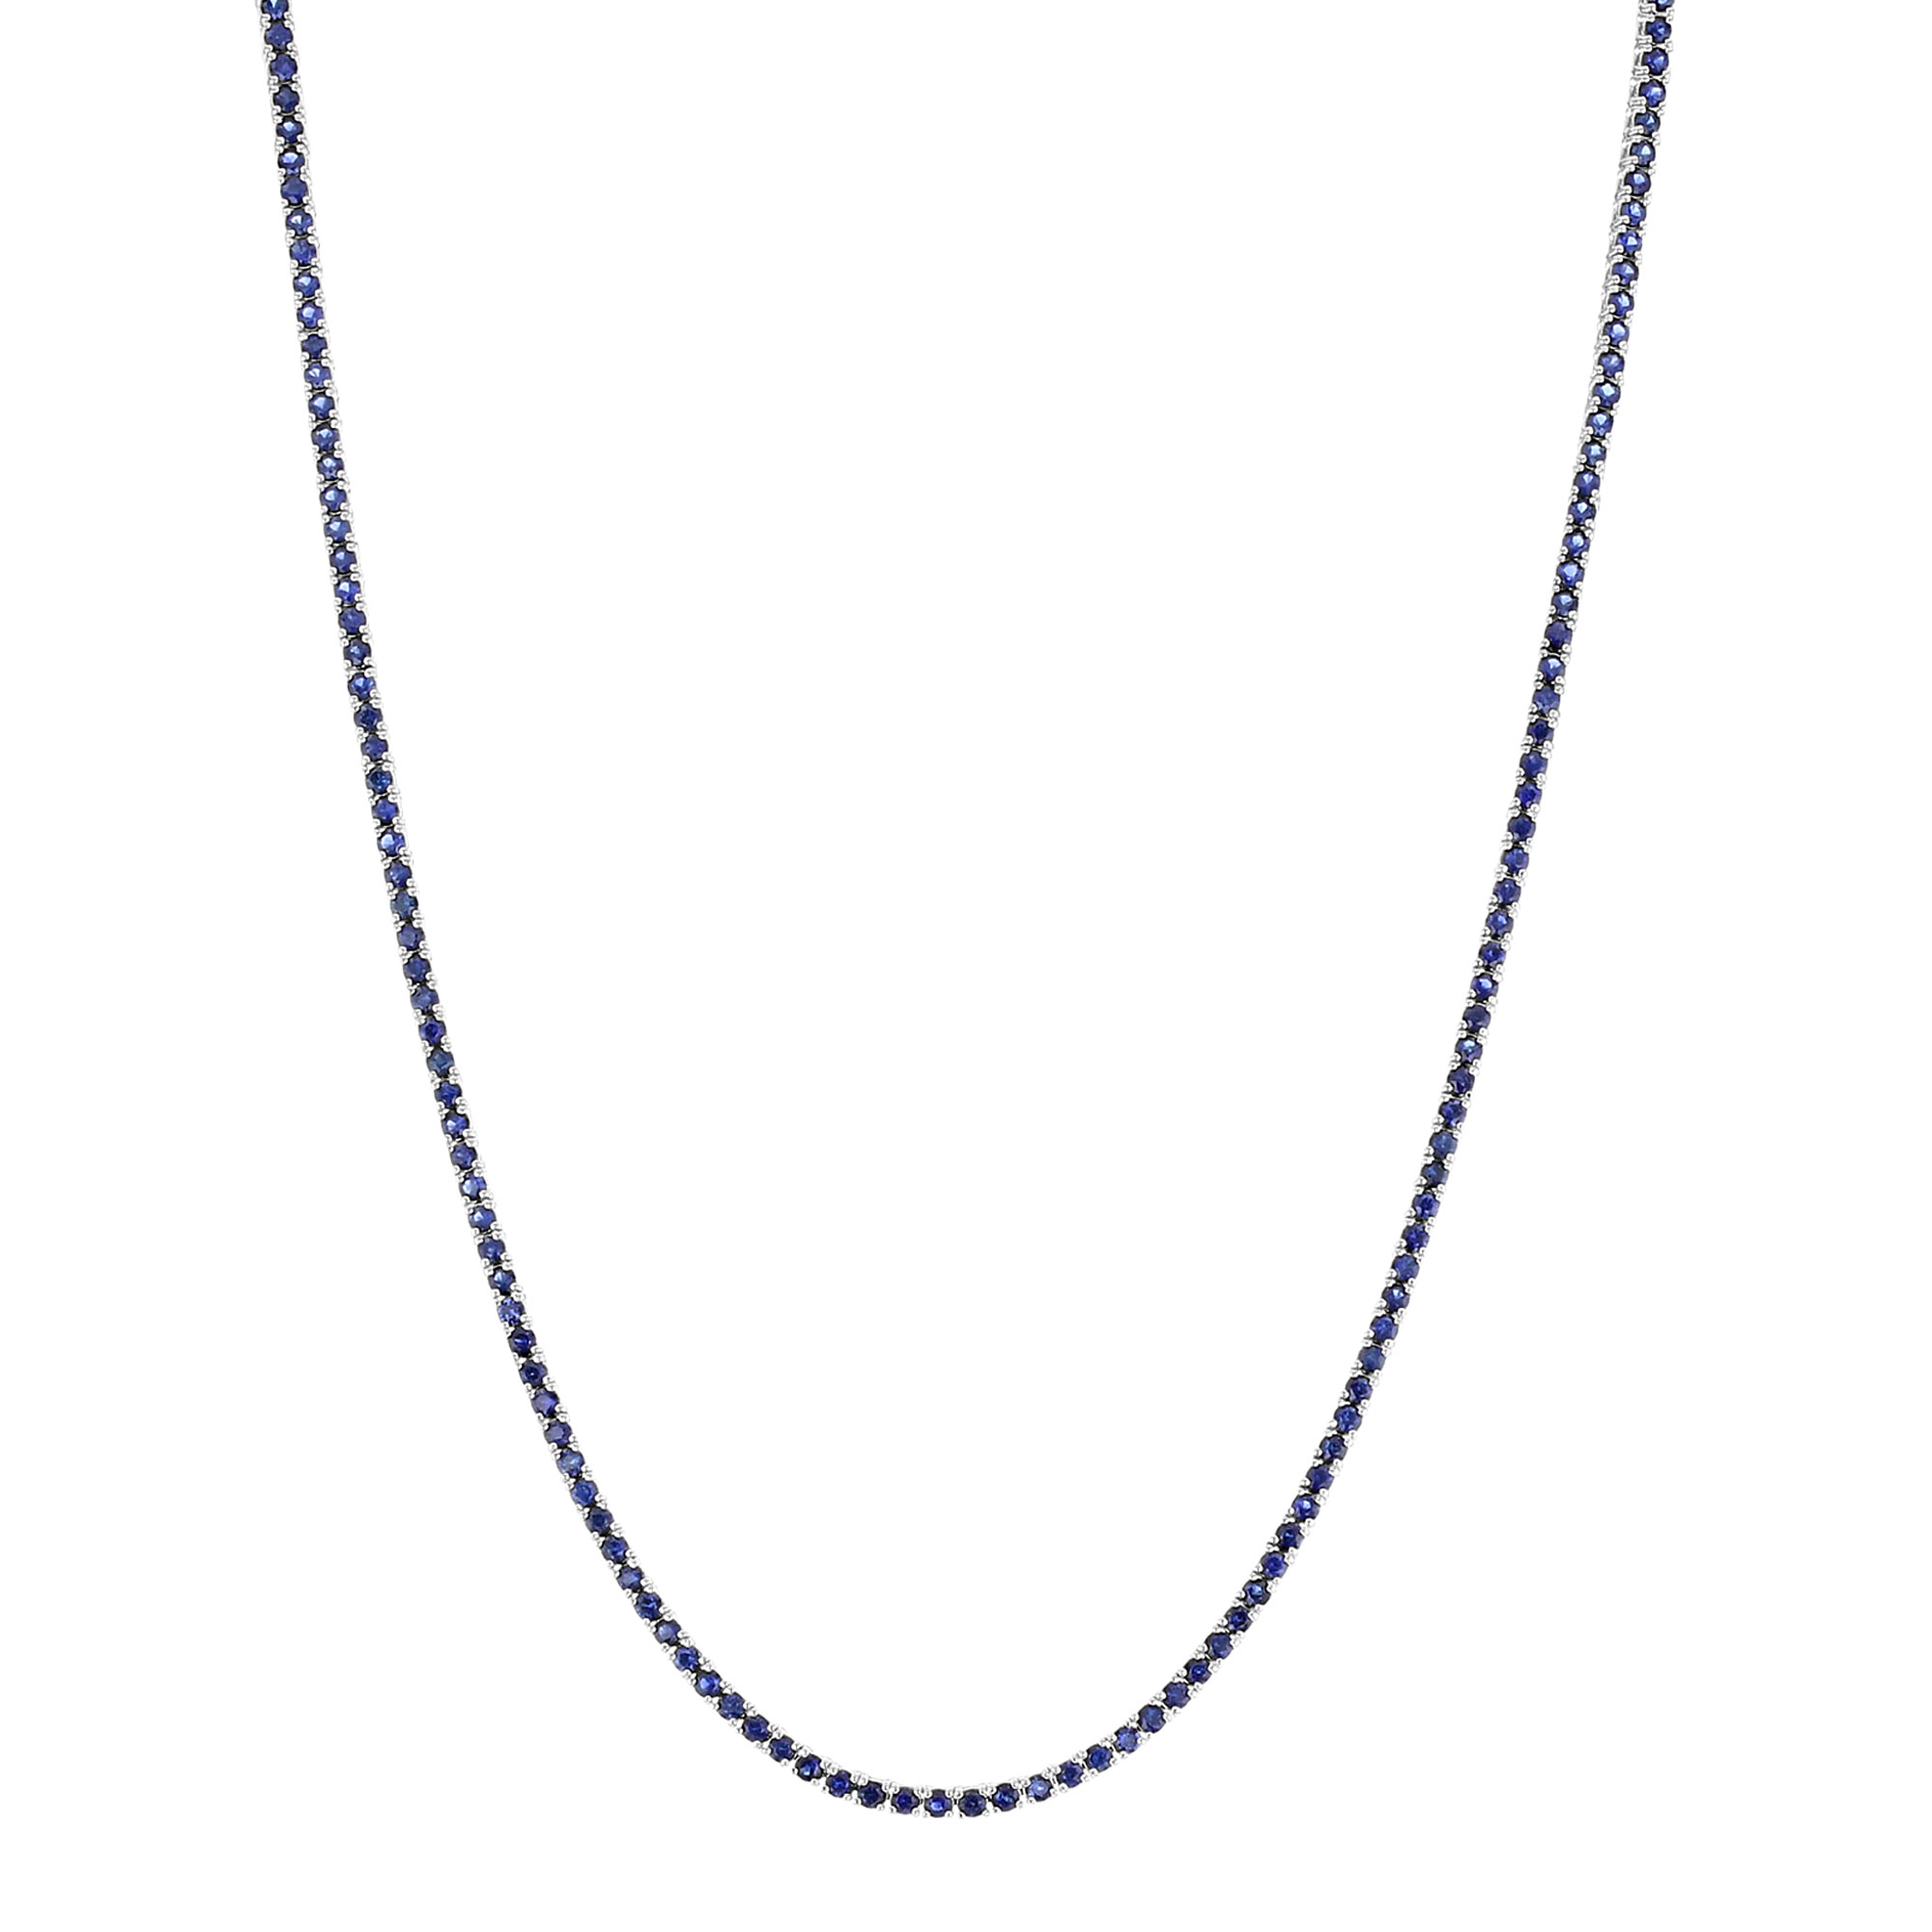 View 7.00ctw Sapphire Tennis Necklace in 17 Inch in 14k White Gold